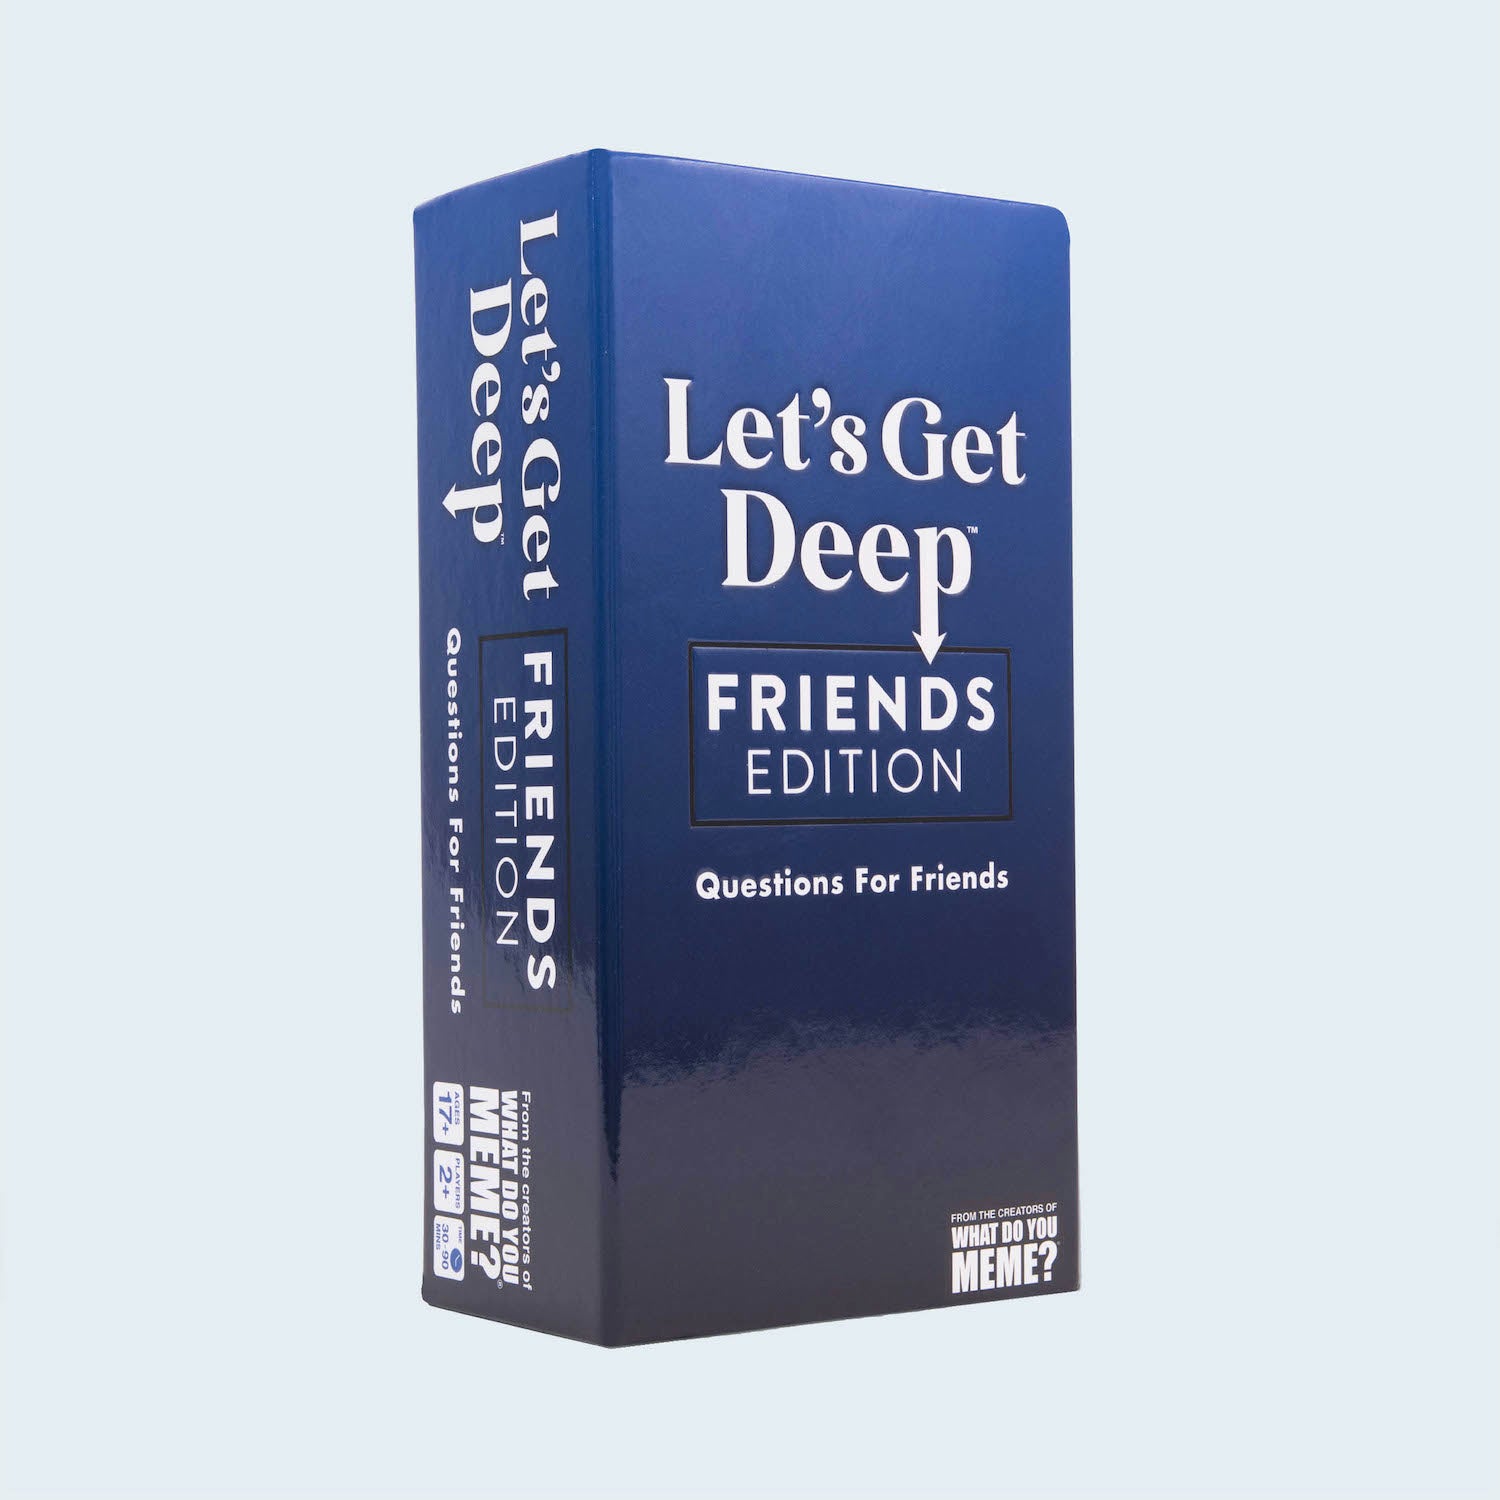 let-s-get-deep-friends-game-box-and-game-play-01-what-do-you-meme-by-relatable